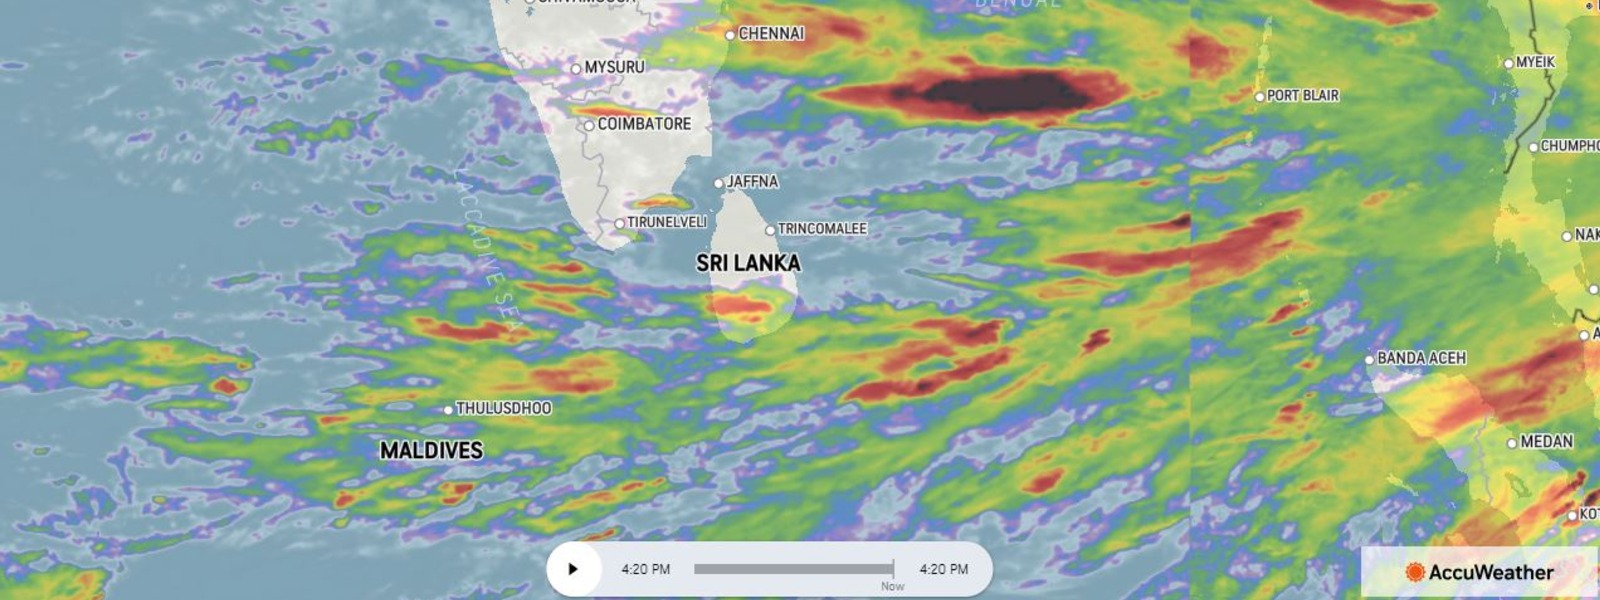 RED ALERT issued for Heavy Rains across many areas in Sri Lanka